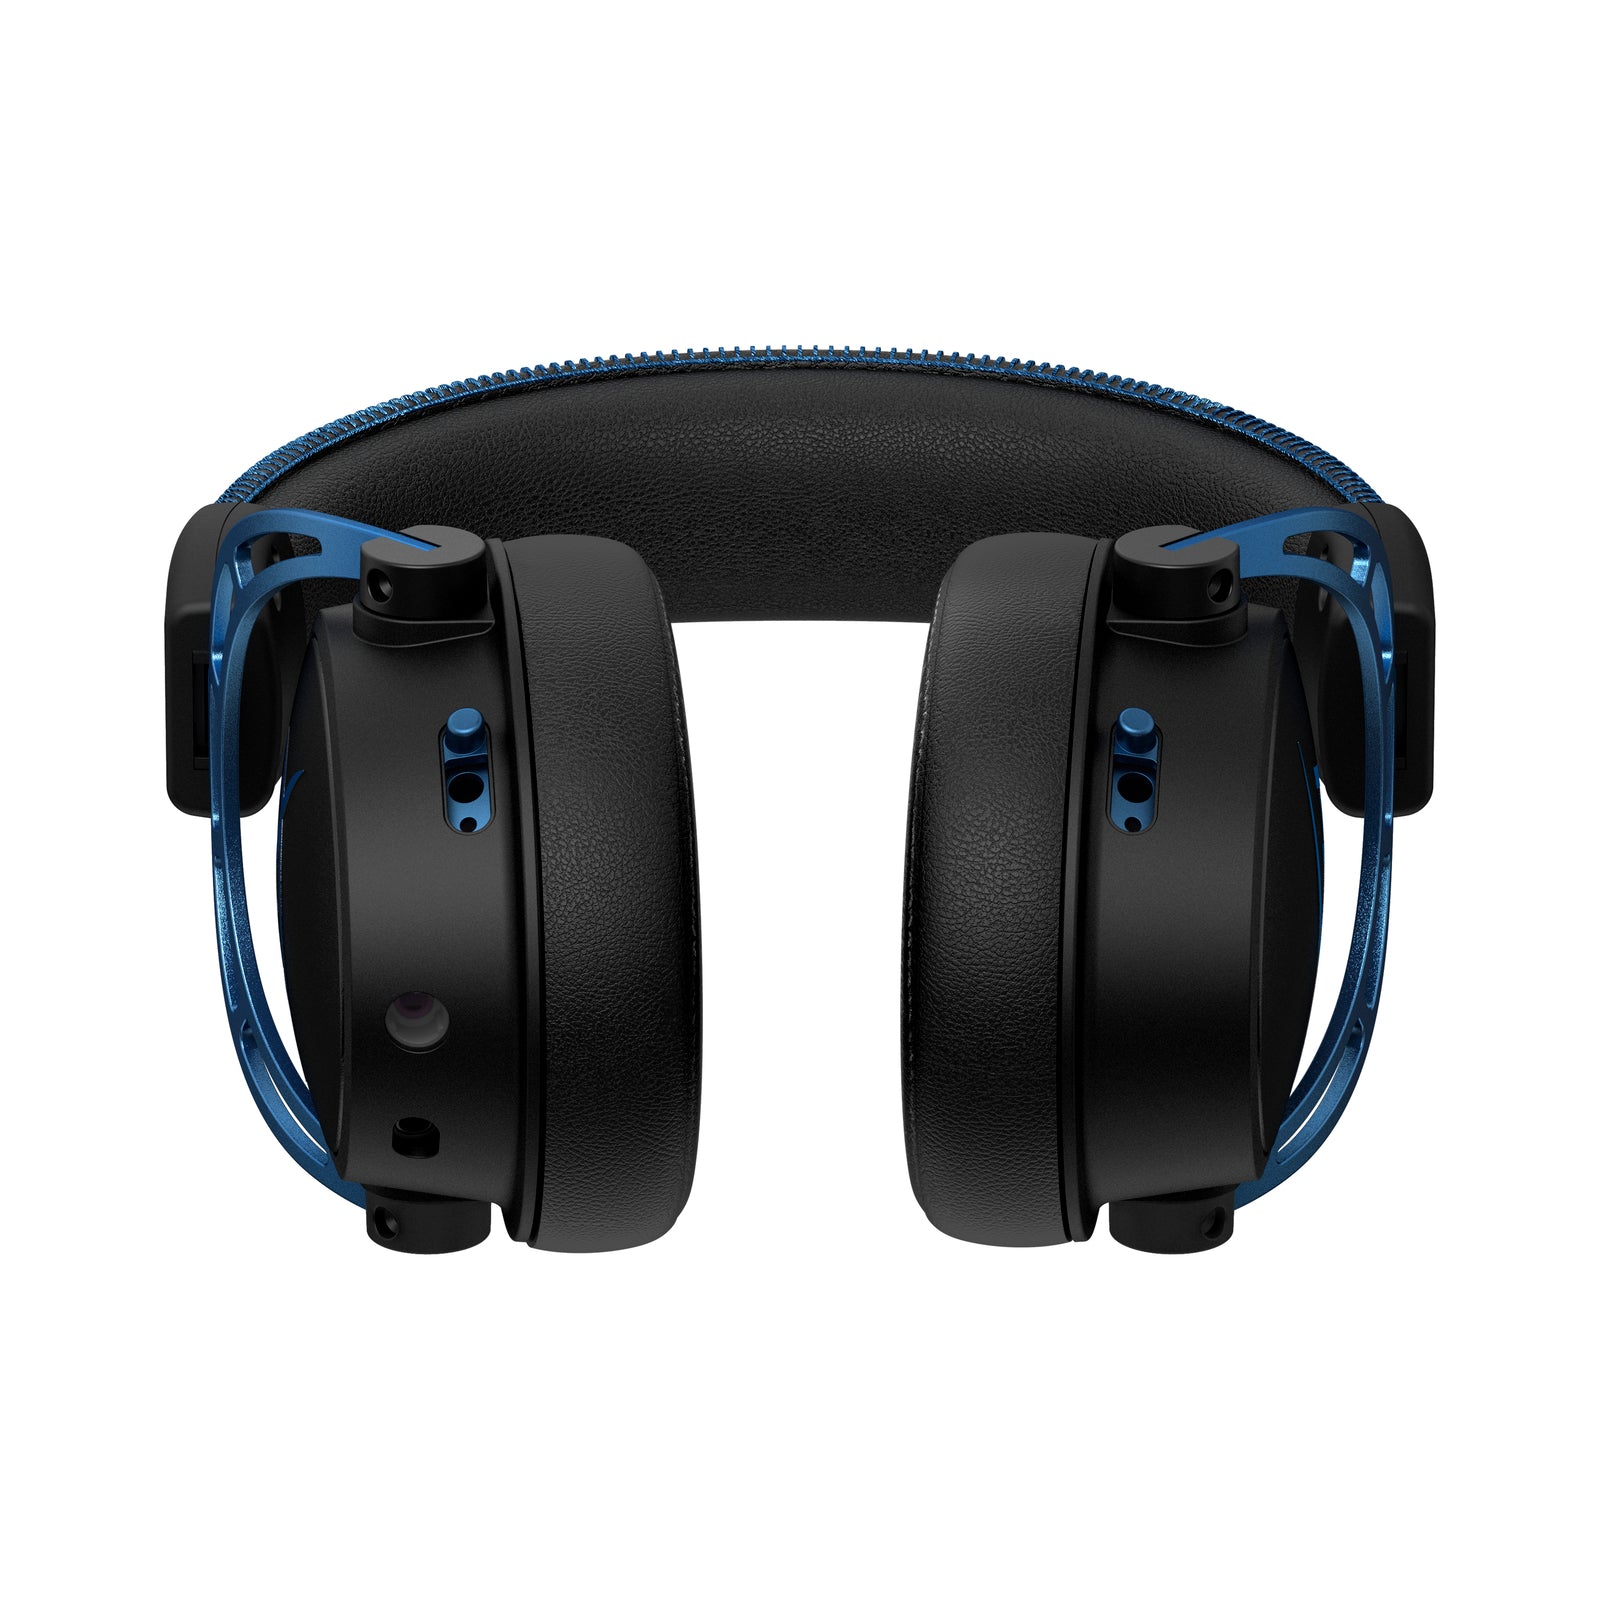 – S with Headset Surround USB | Cloud Sound Alpha Gaming HyperX 7.1